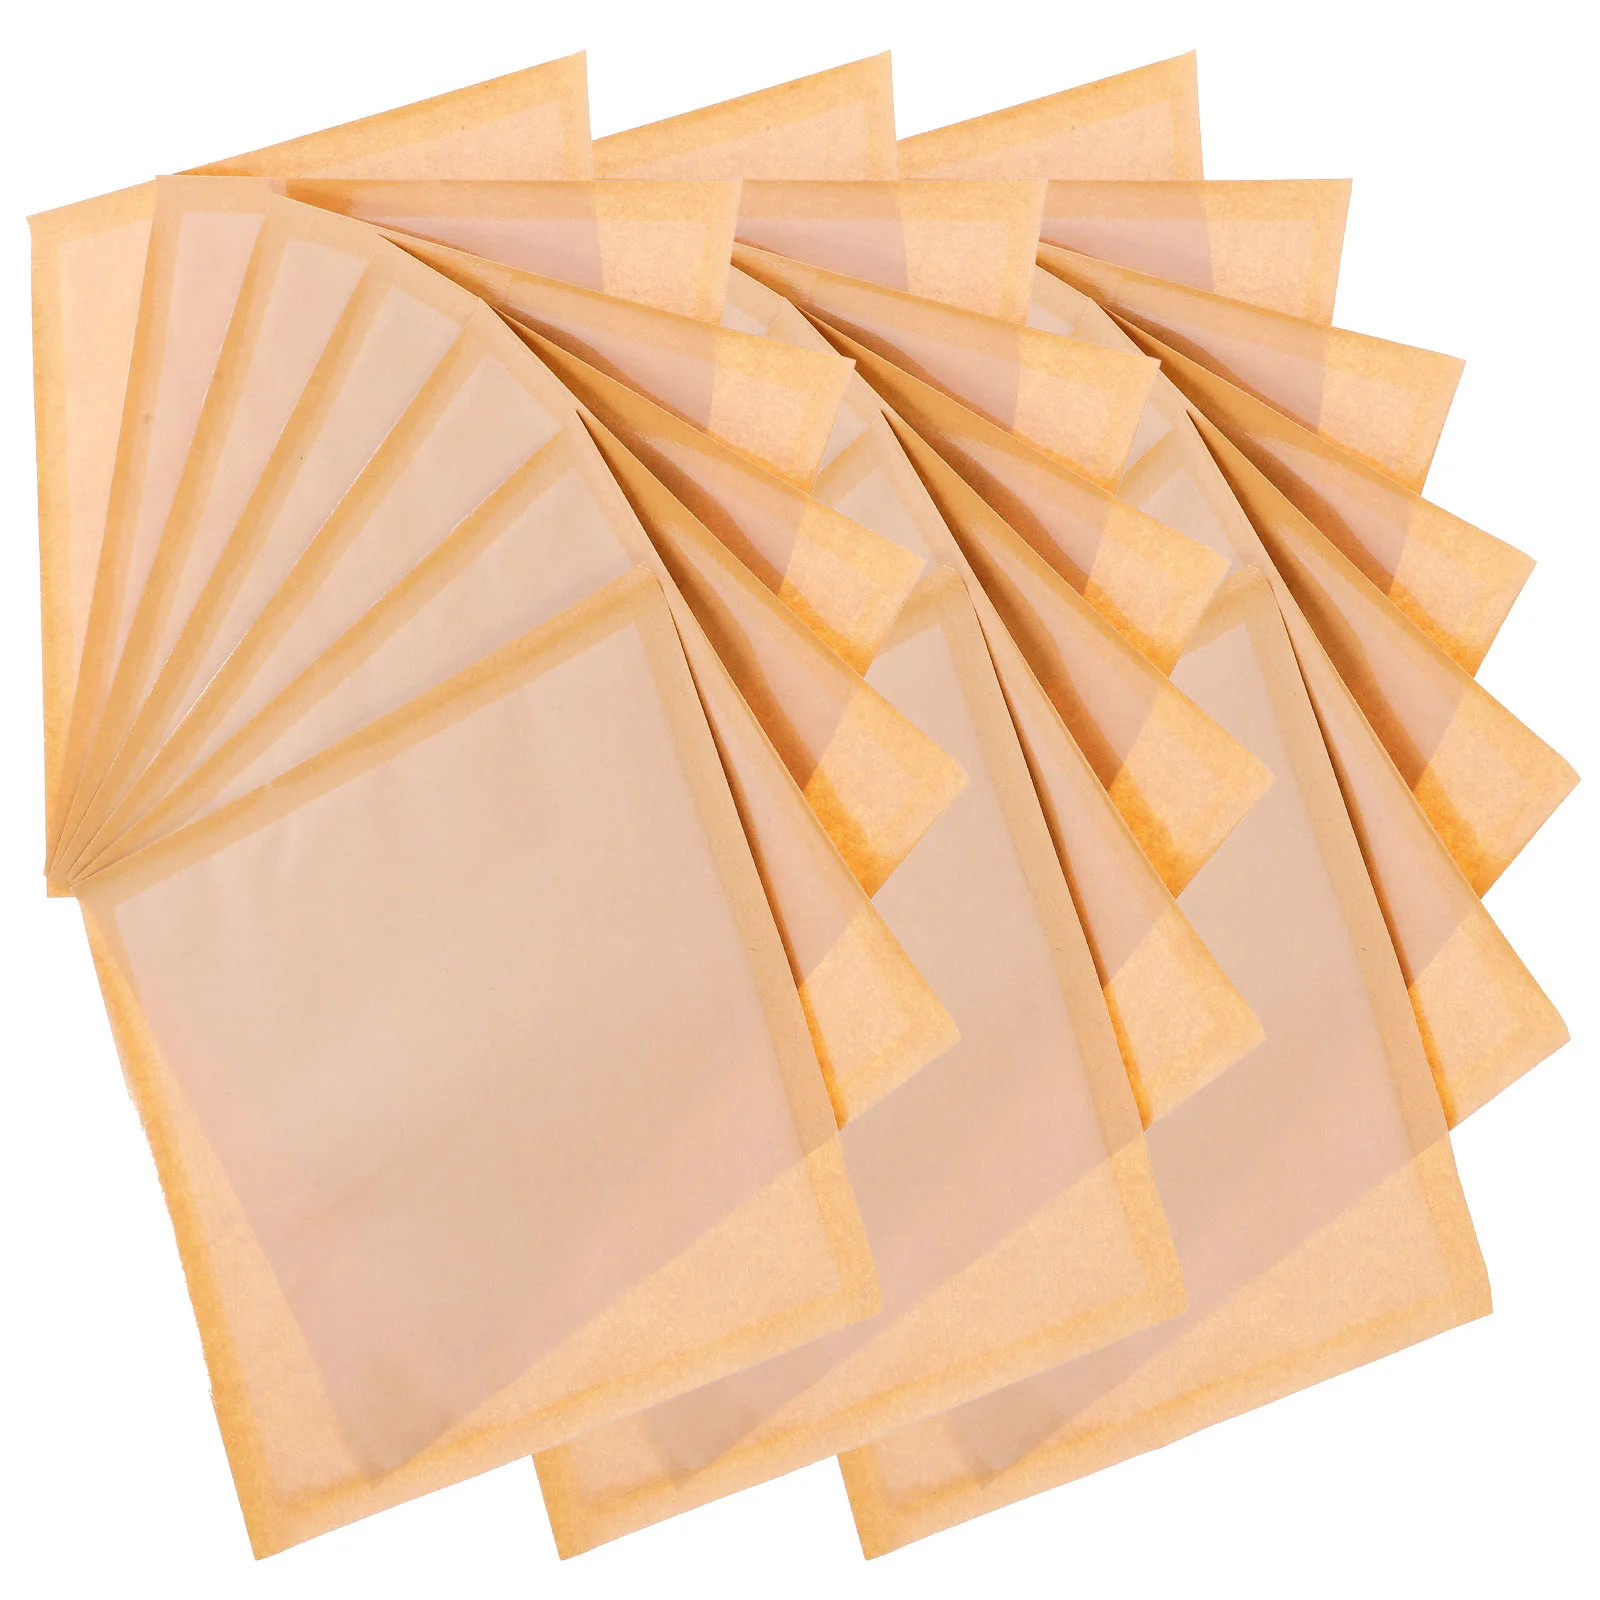 

100 Pcs Heat Seal Bags Cookies Kraft Paper Bread Bakery Window Household Sandwich Baggies Pastry Baking Wrapping Pouches